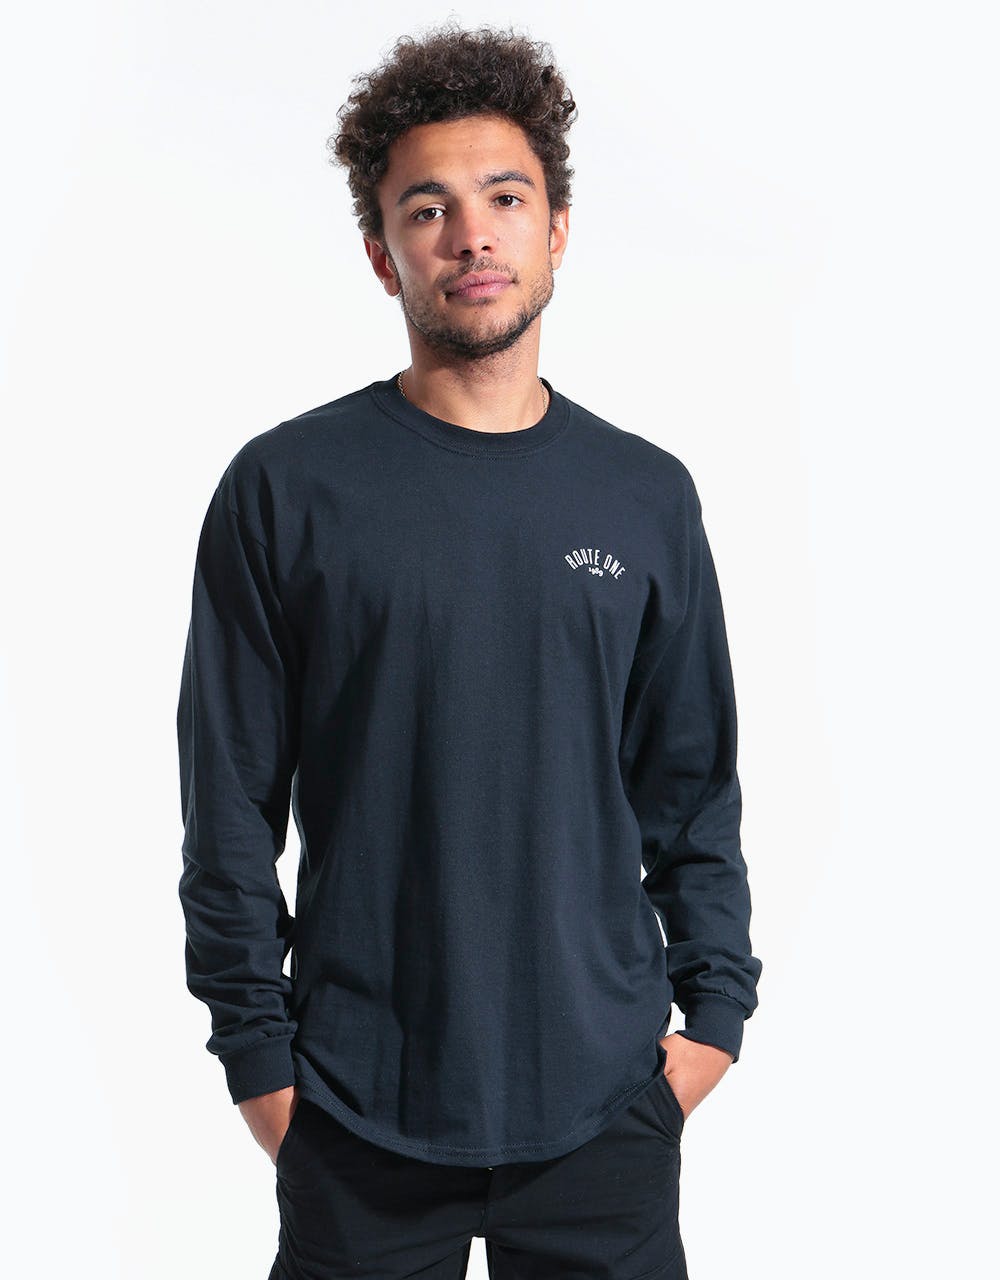 Route One Four Corners LS T-Shirt - Black